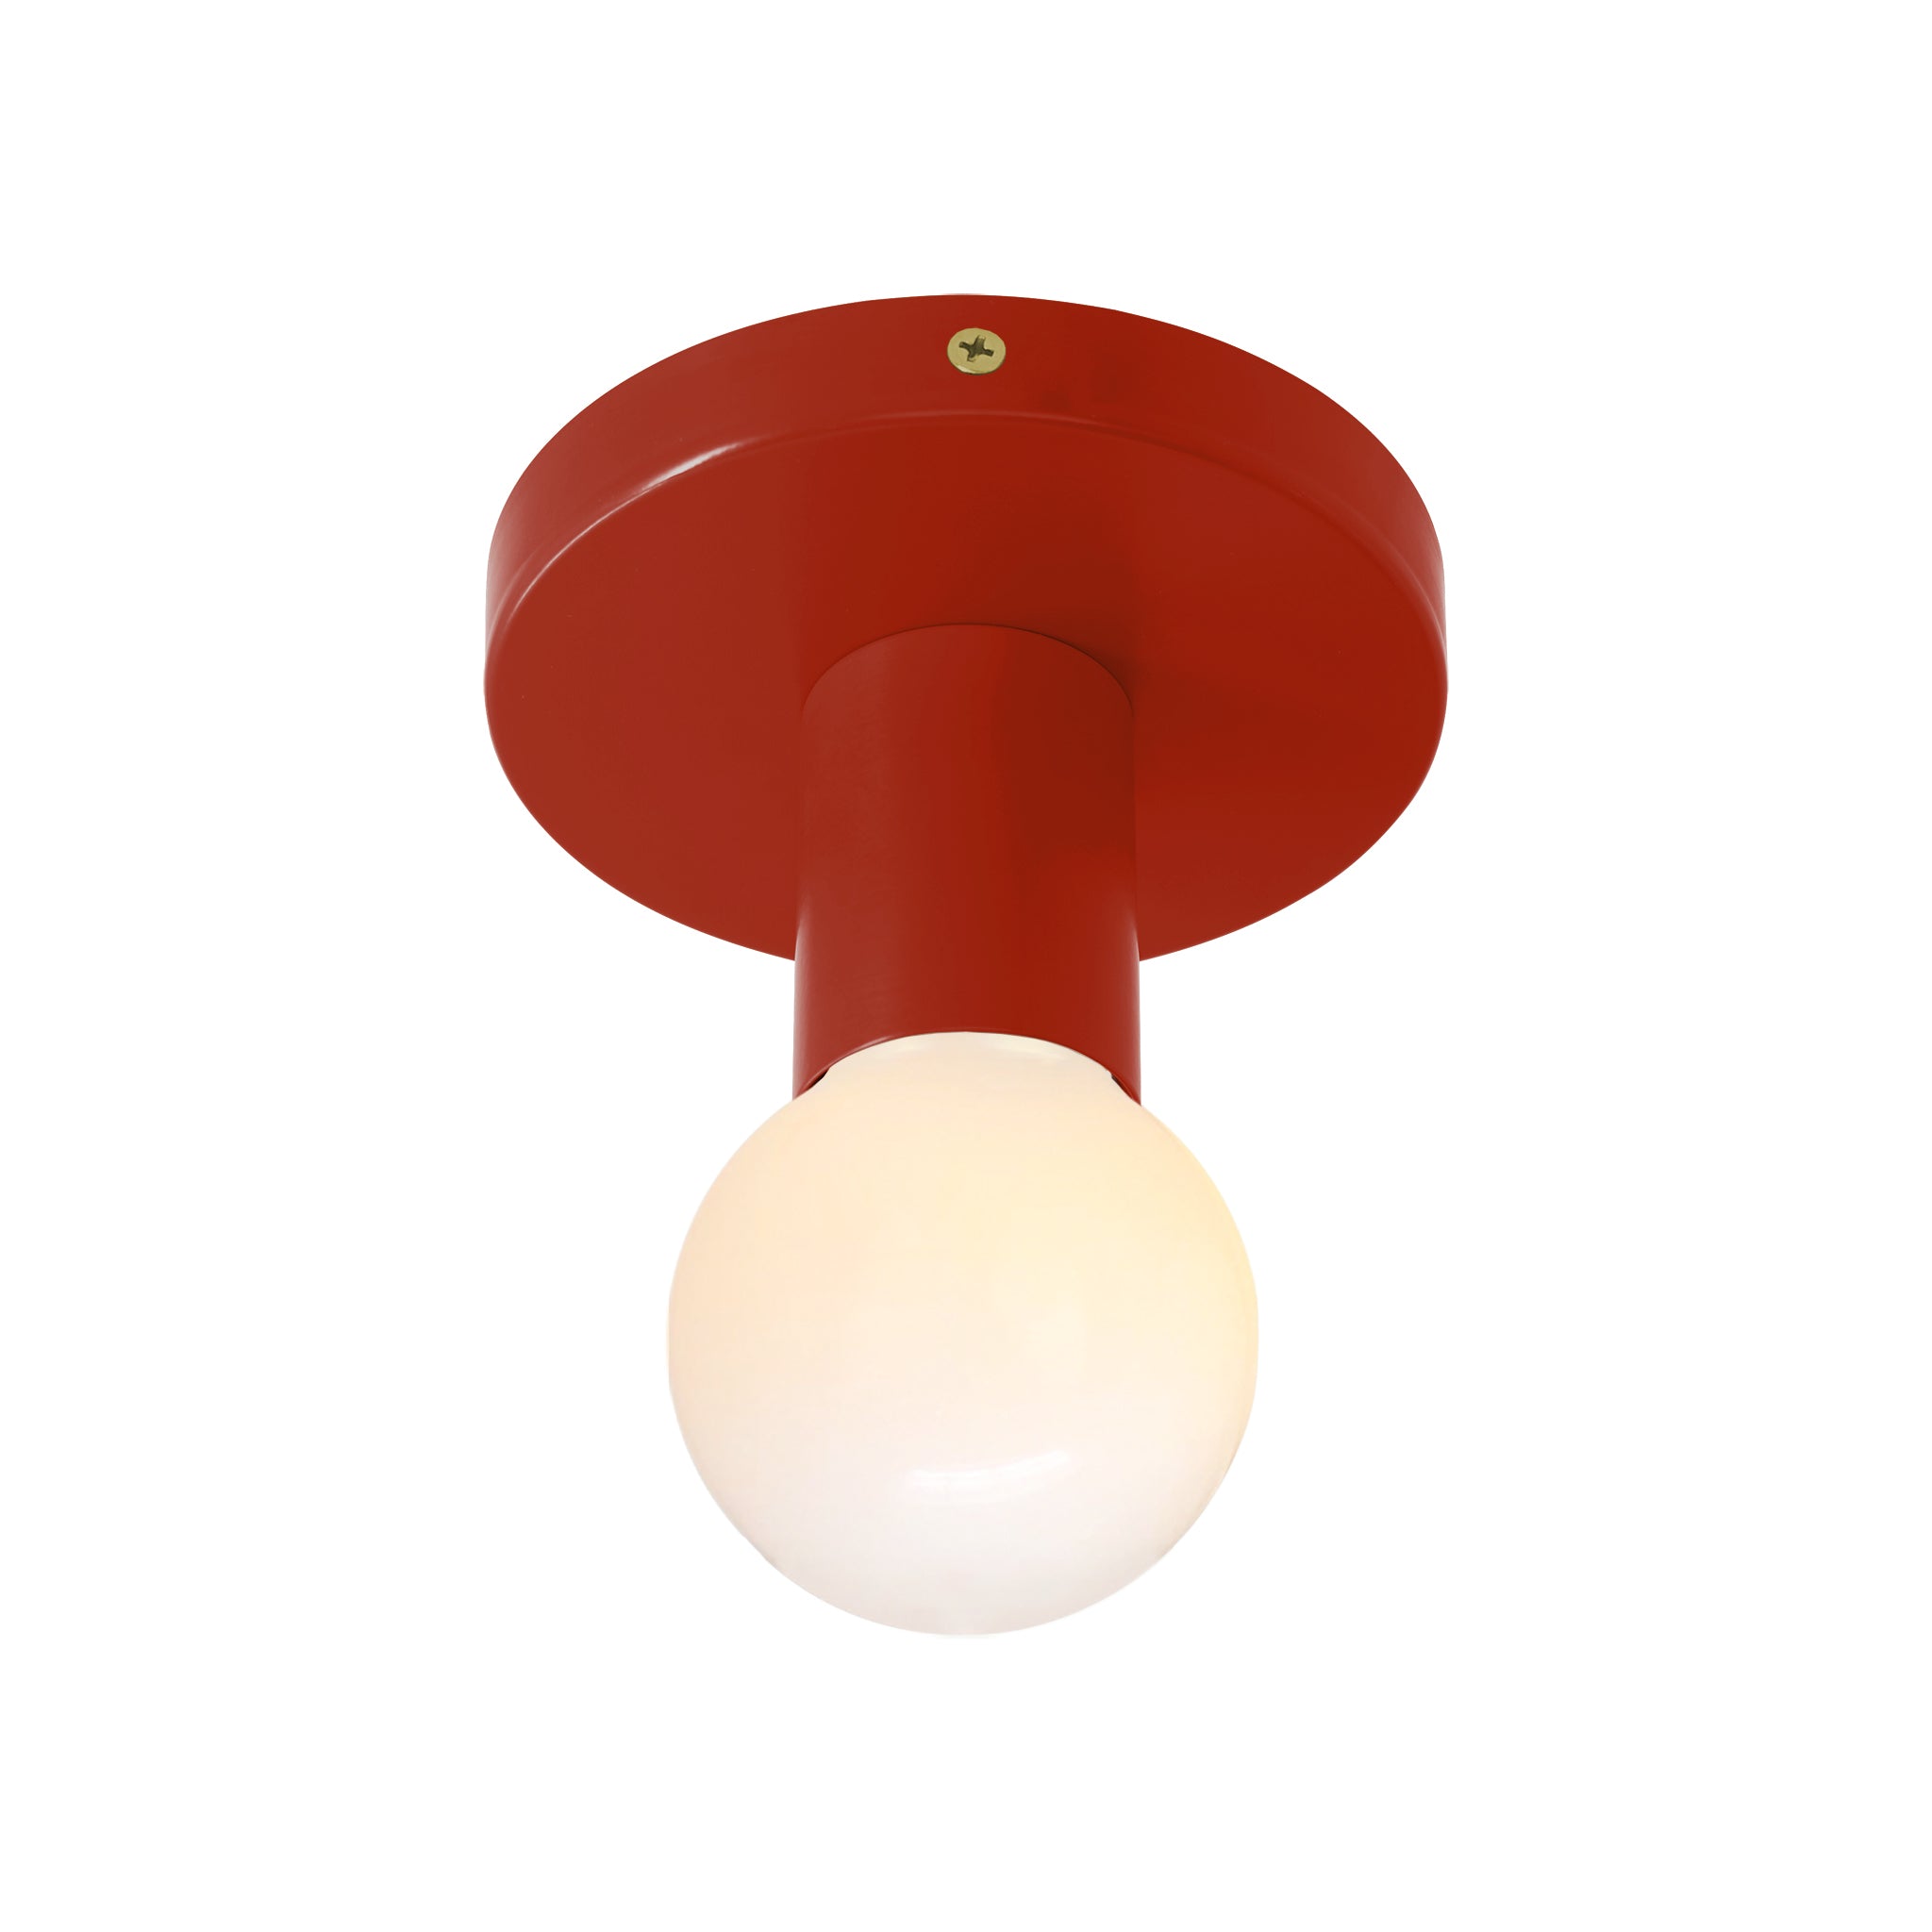 Brass and riding hood red color Twink flush mount Dutton Brown lighting